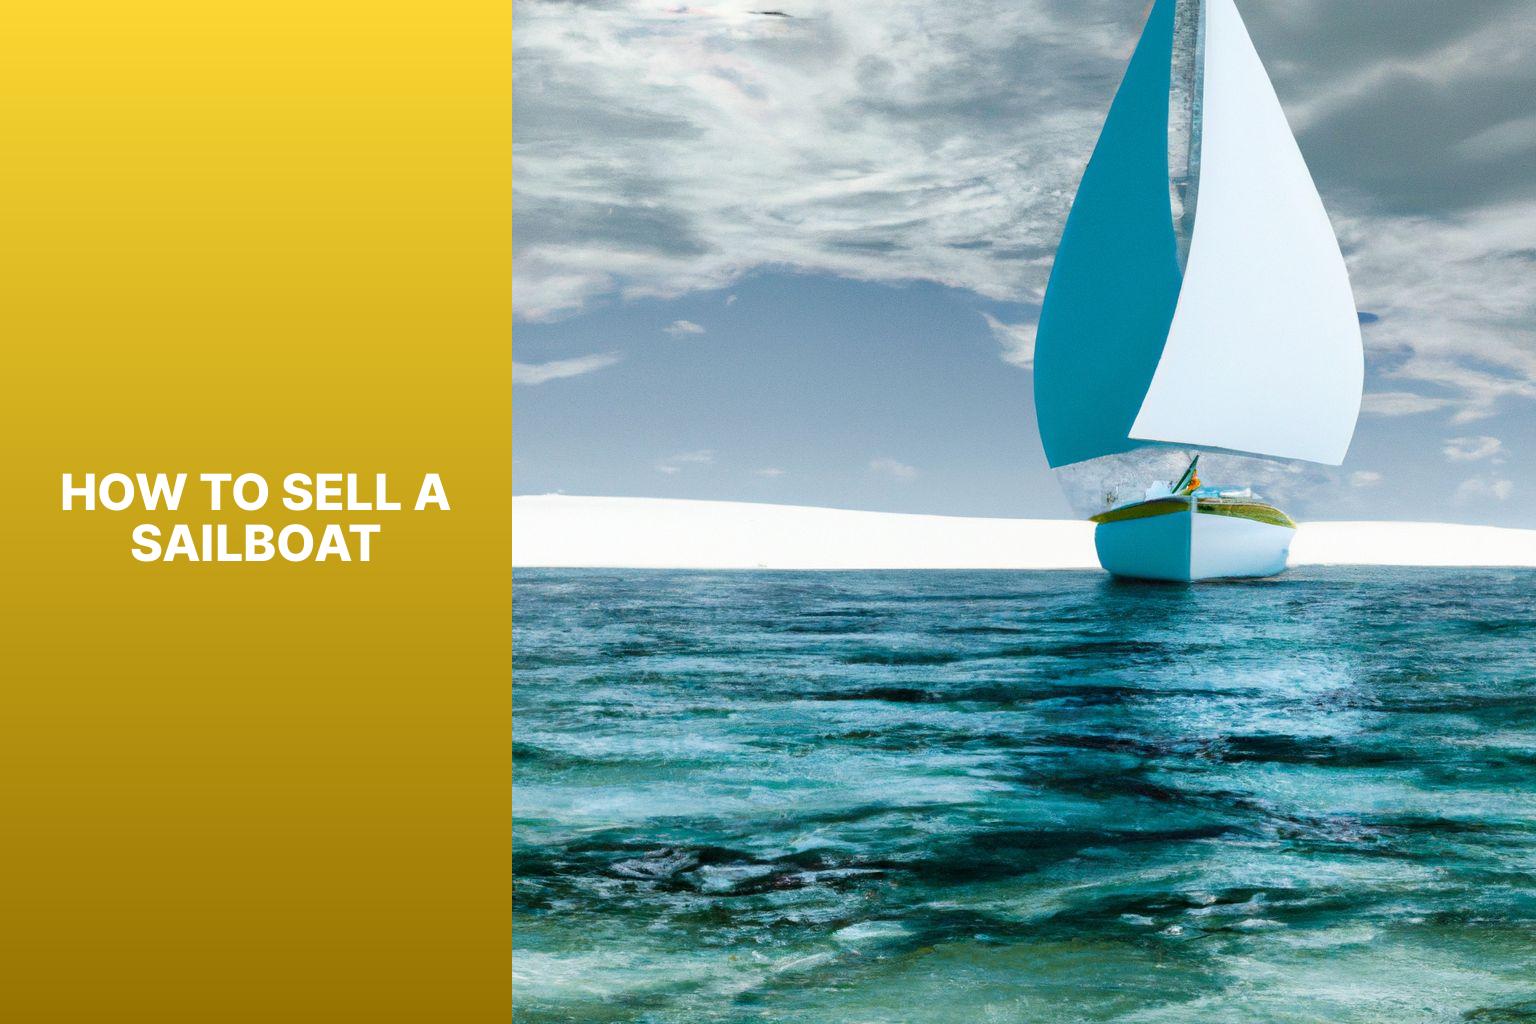 Maximize Profits: Learn How to Sell a Sailboat Like a Pro